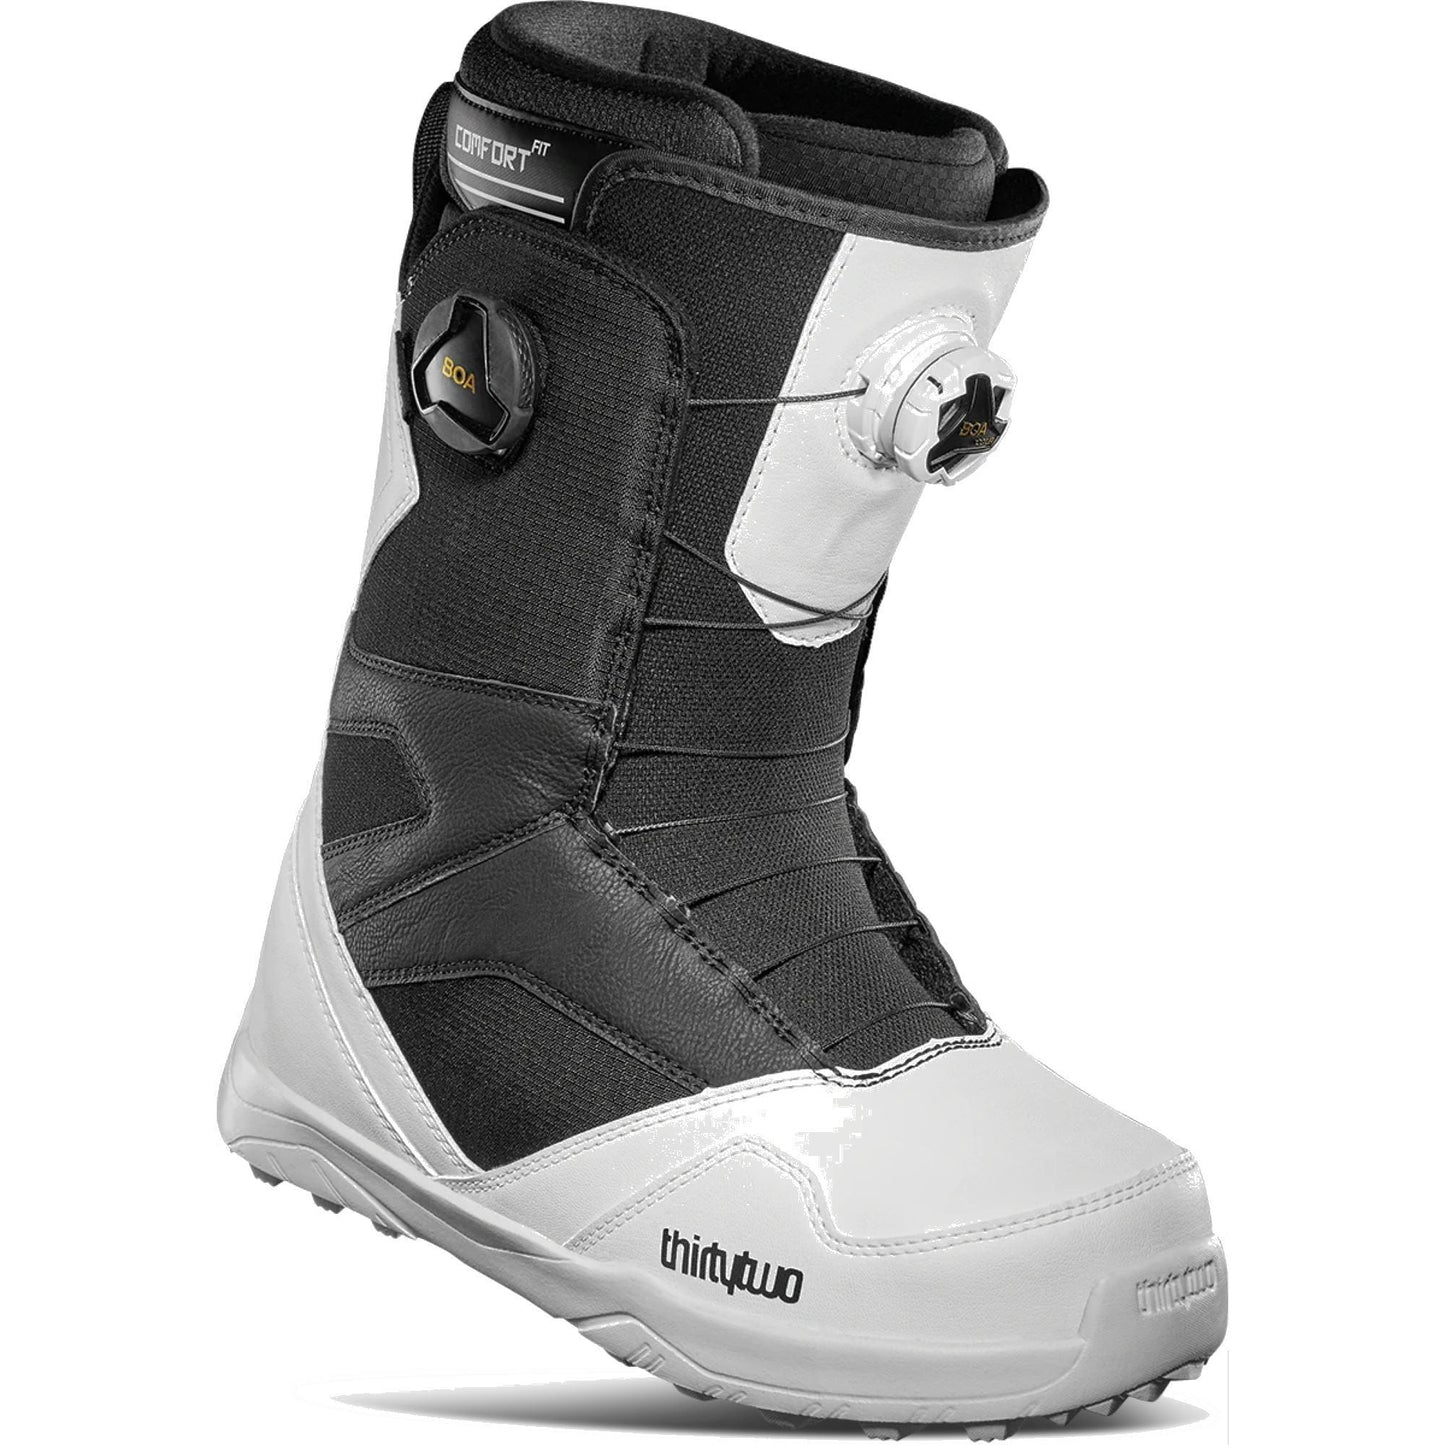 ThirtyTwo STW Double BOA Snowboard Boots - OpenBox White Black Snowboard Boots